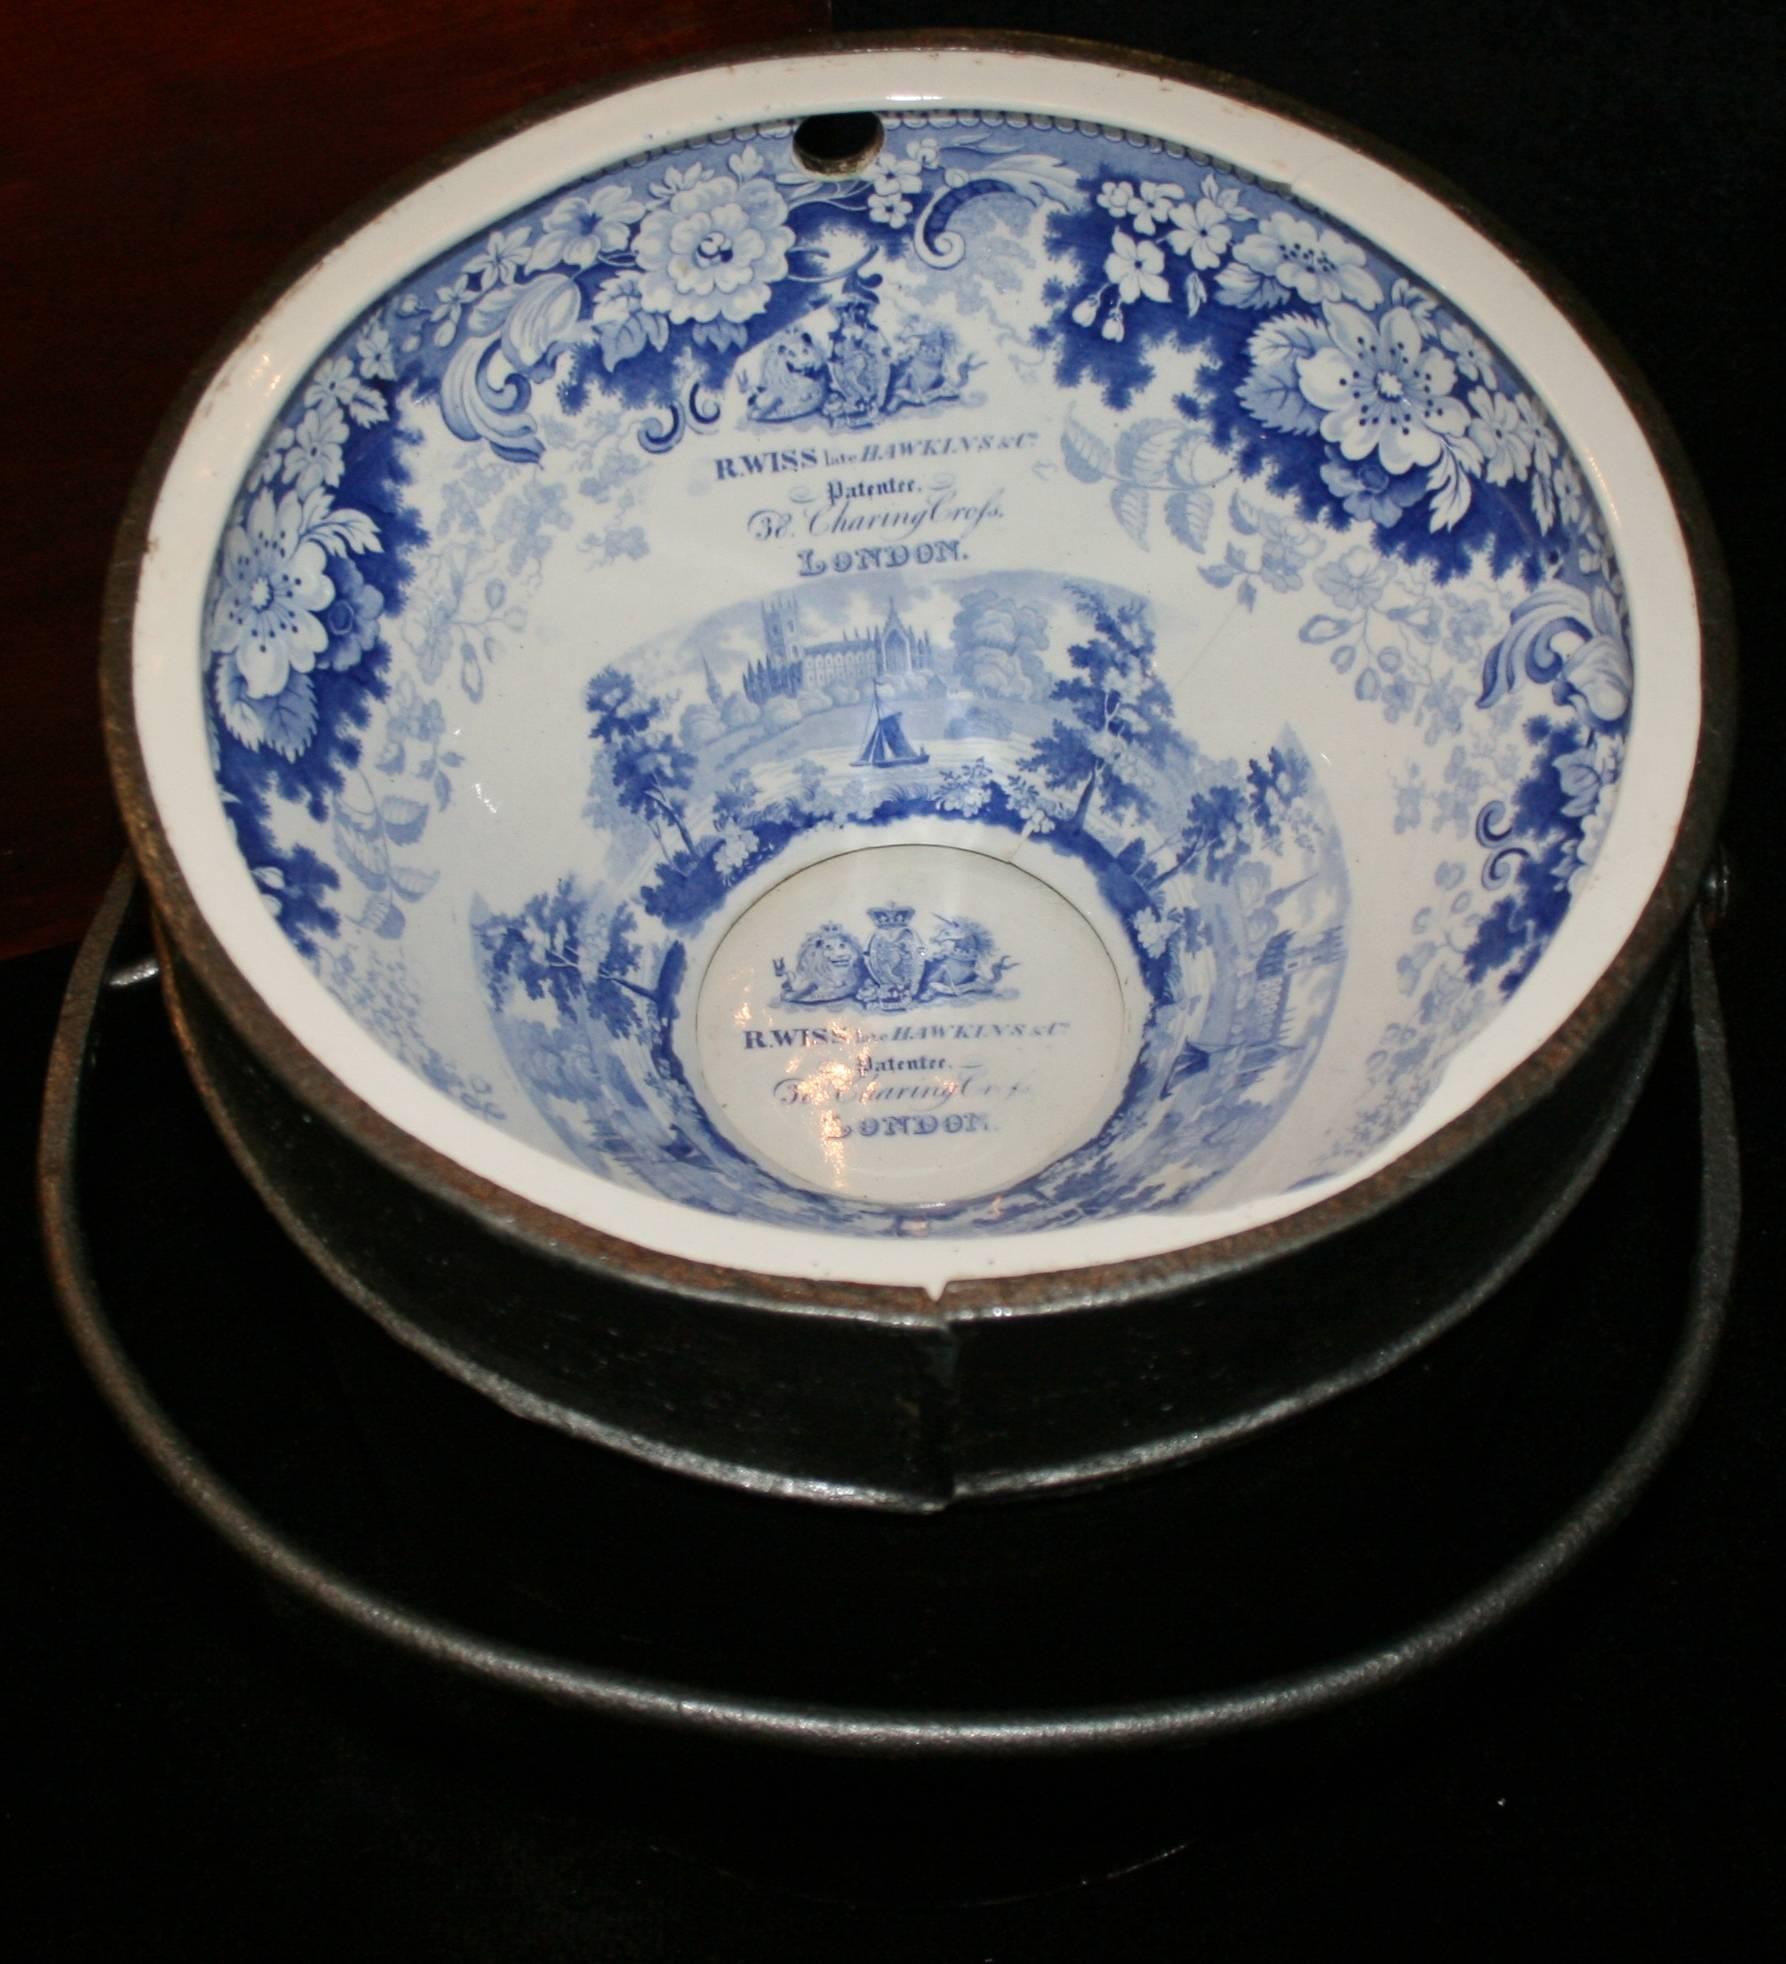 

Manufacturer R.Wiss late Hawkins & Co., London.
Porcelain blue and white.
Date 19th century.
Case pine.
Width 58.5 cm / 23 in.
Depth 48 cm / 19 in.
Height 44 cm / 17 1/4 in.
Condition Very good condition commensurate with age. One or two